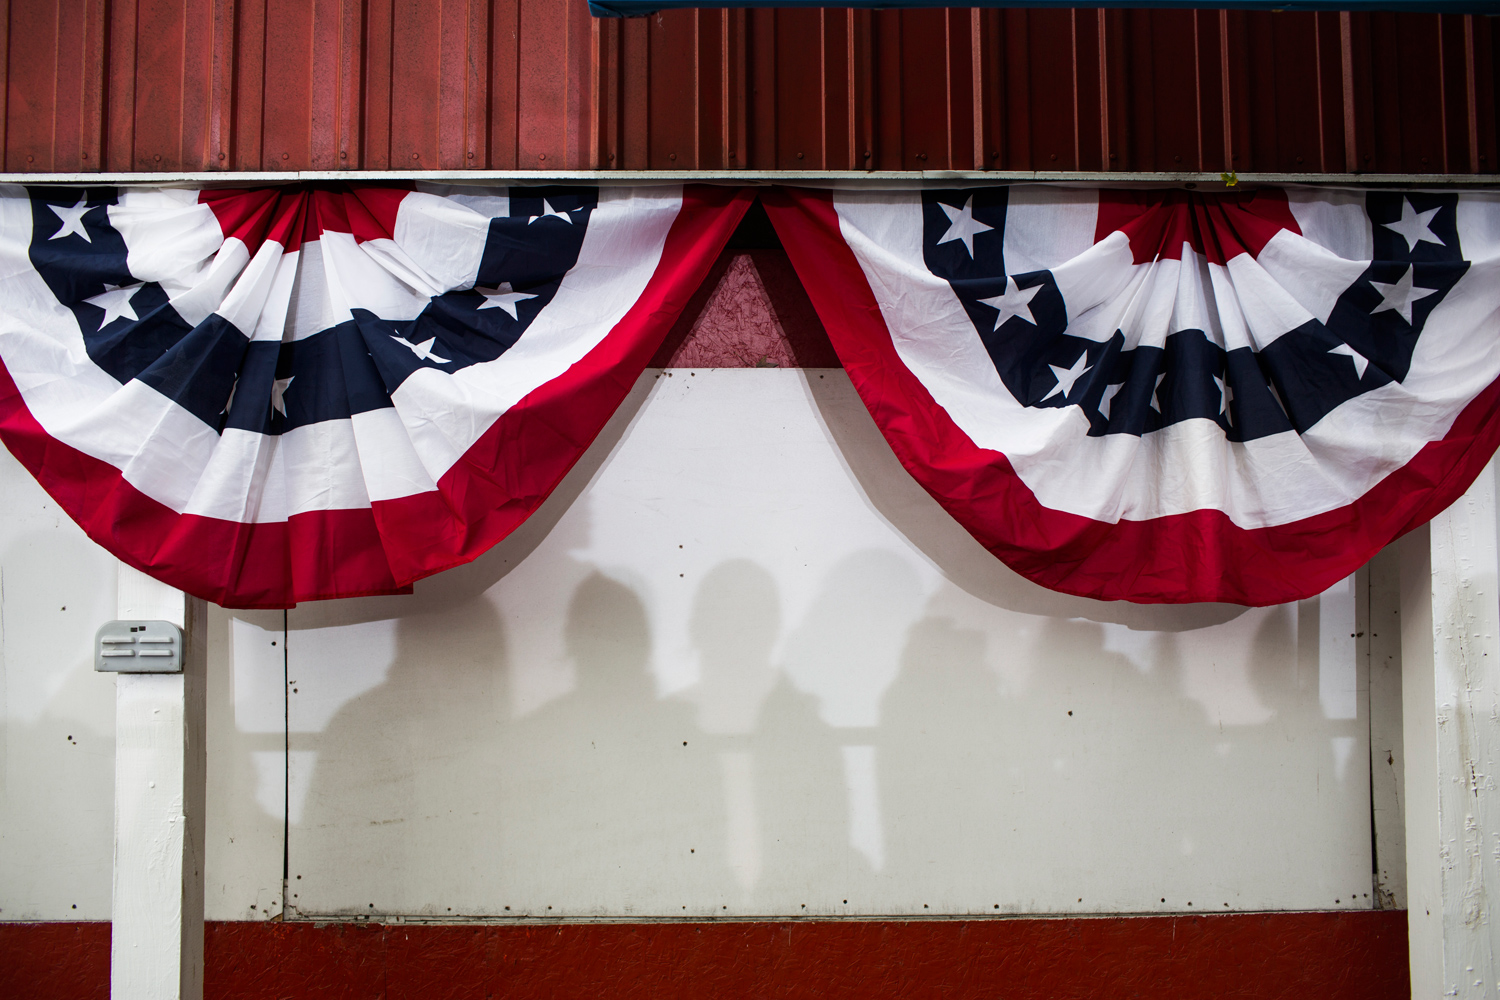 Image: Oct. 24, 2012. Supporters are shadowed on a wall as President Obama attends a campaign rally in Davenport, Iowa.